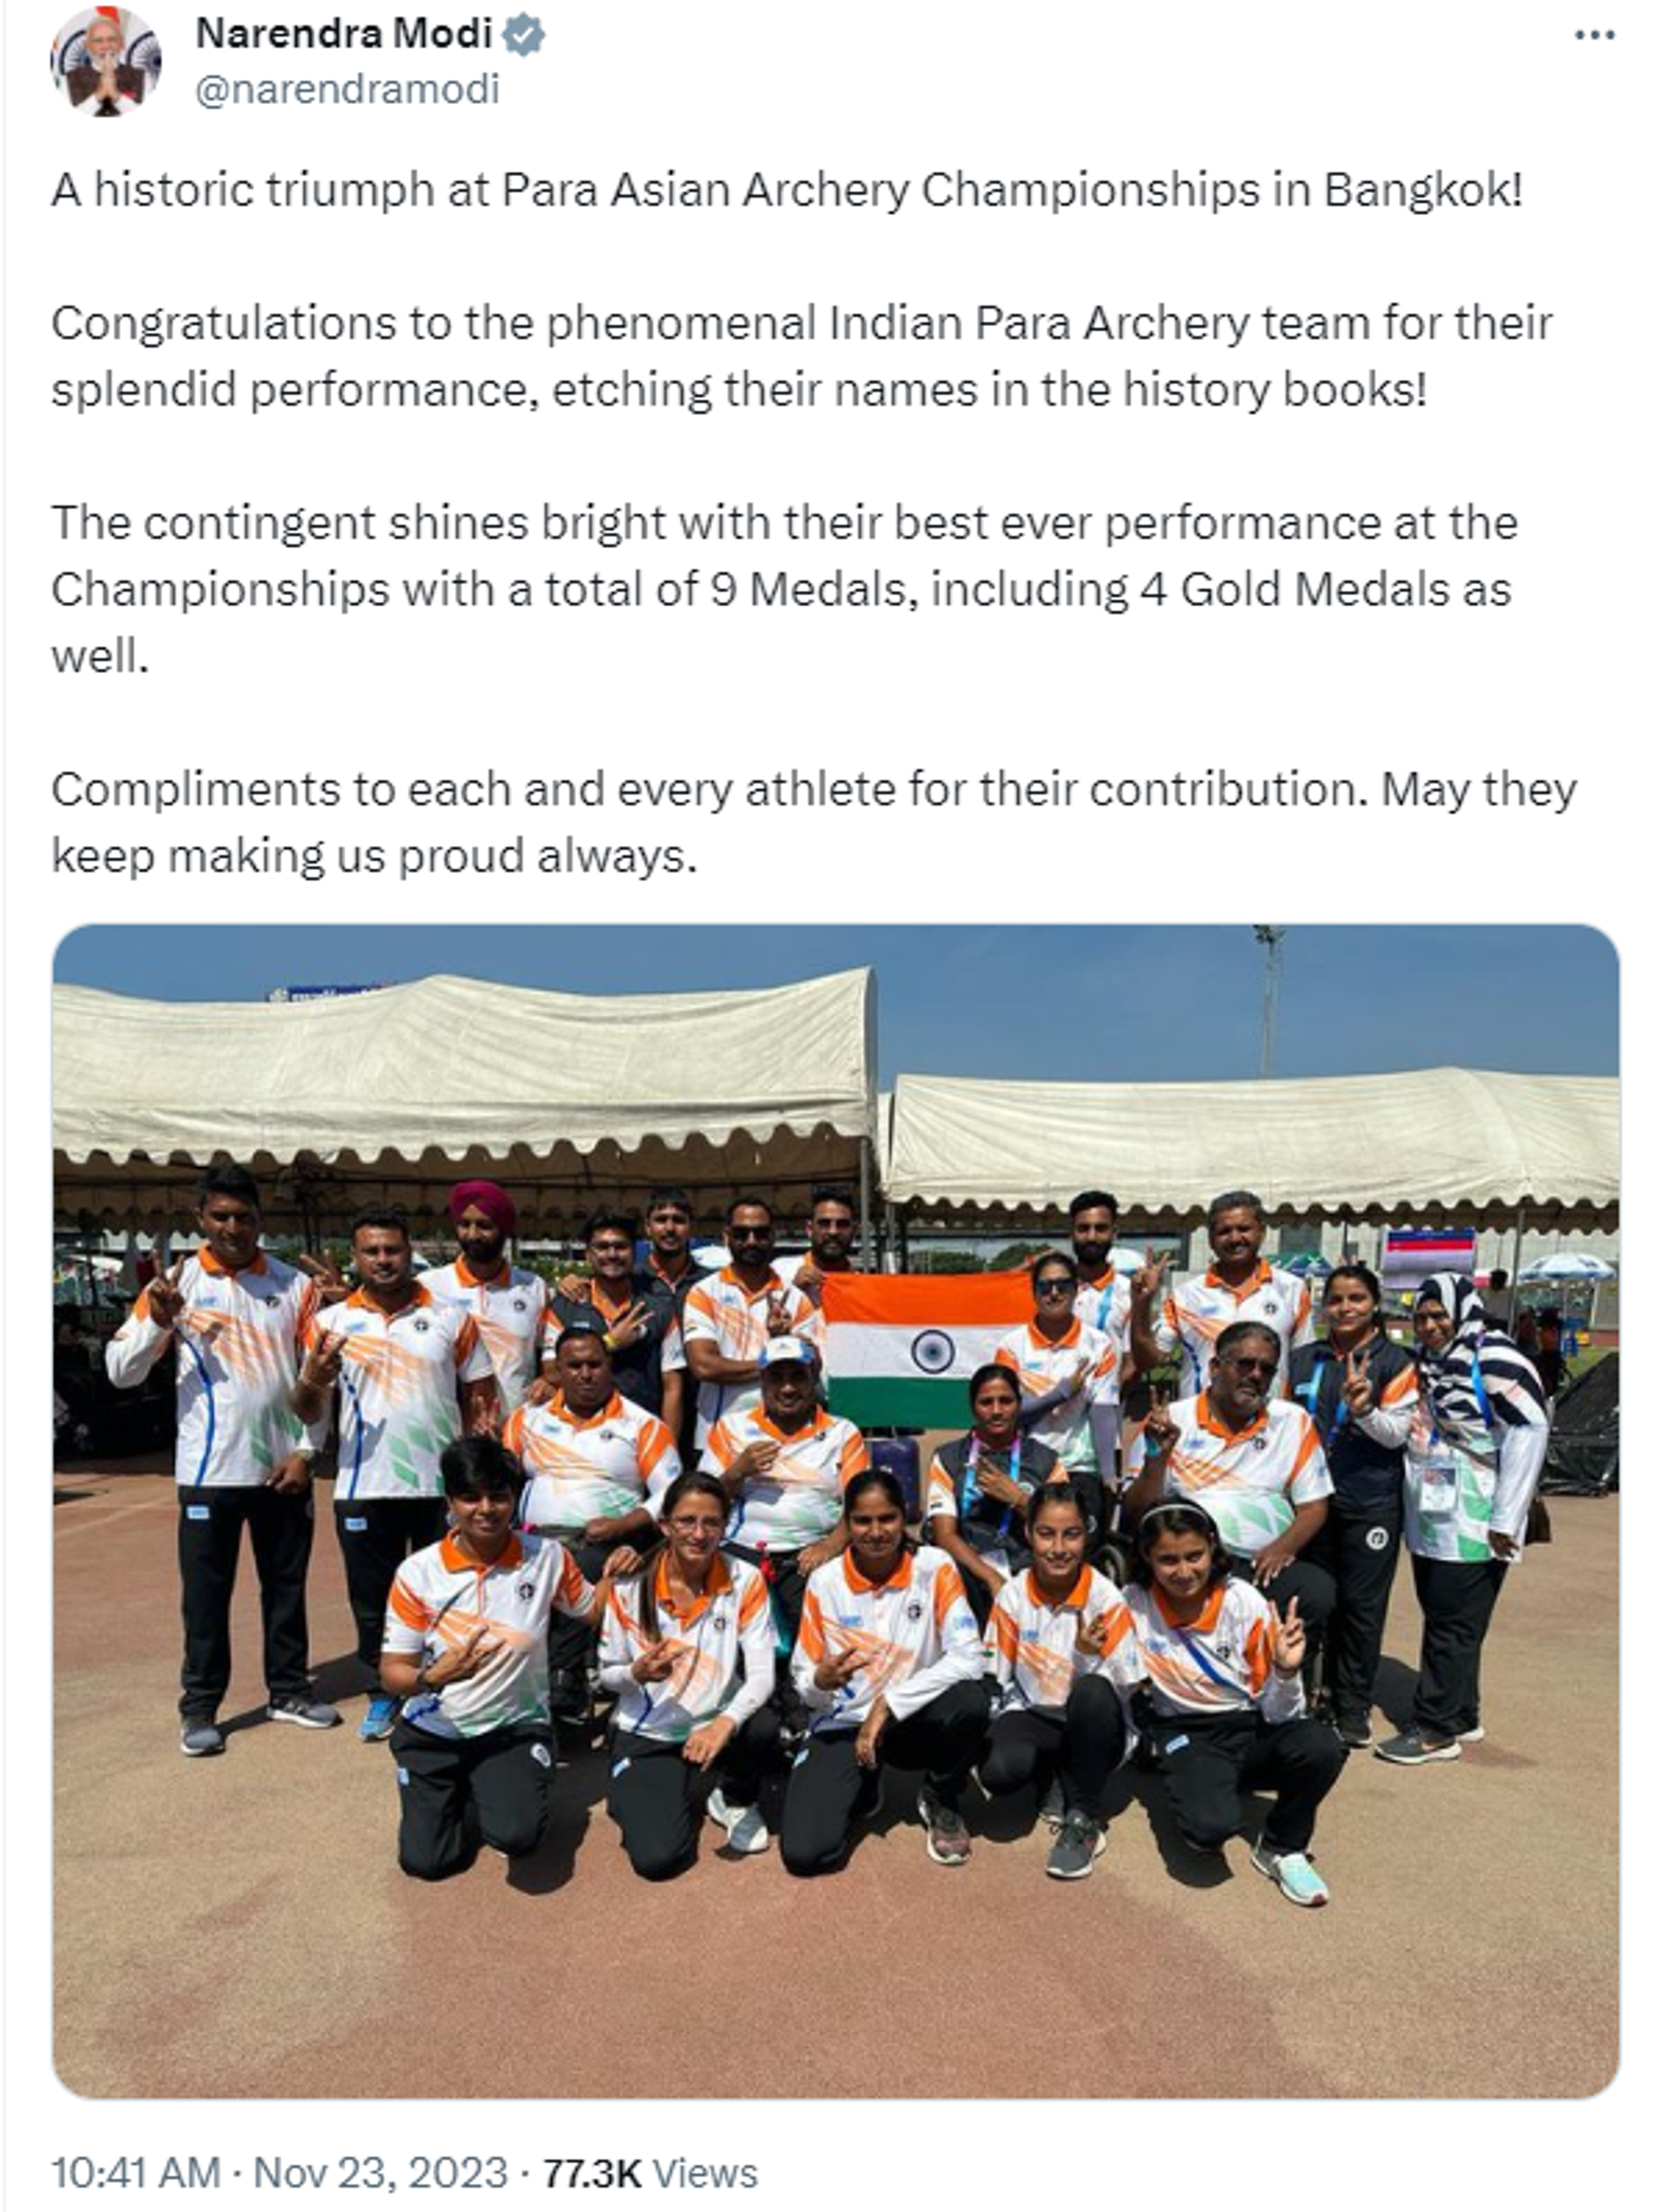 PM Modi Lauds Indian Team for Historic Feat in Asian Para Archery Championships - Sputnik India, 1920, 23.11.2023